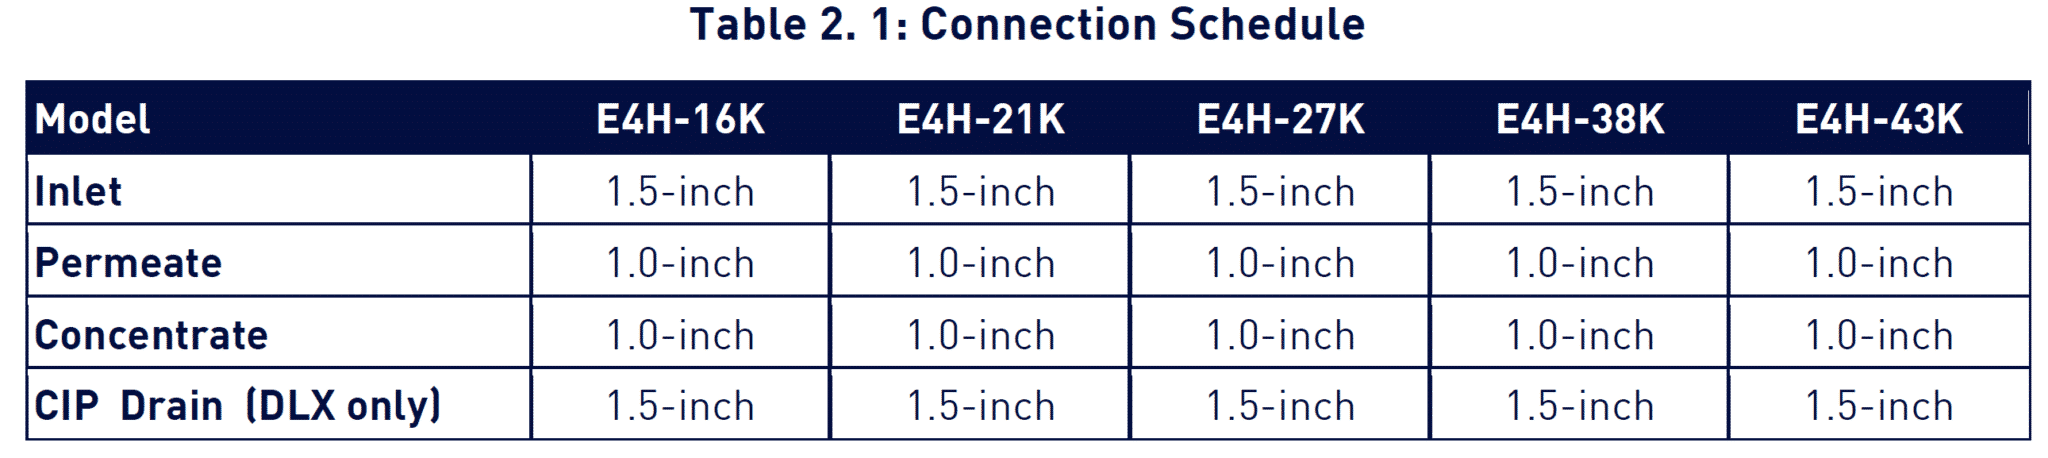 table 2.1connection schedule